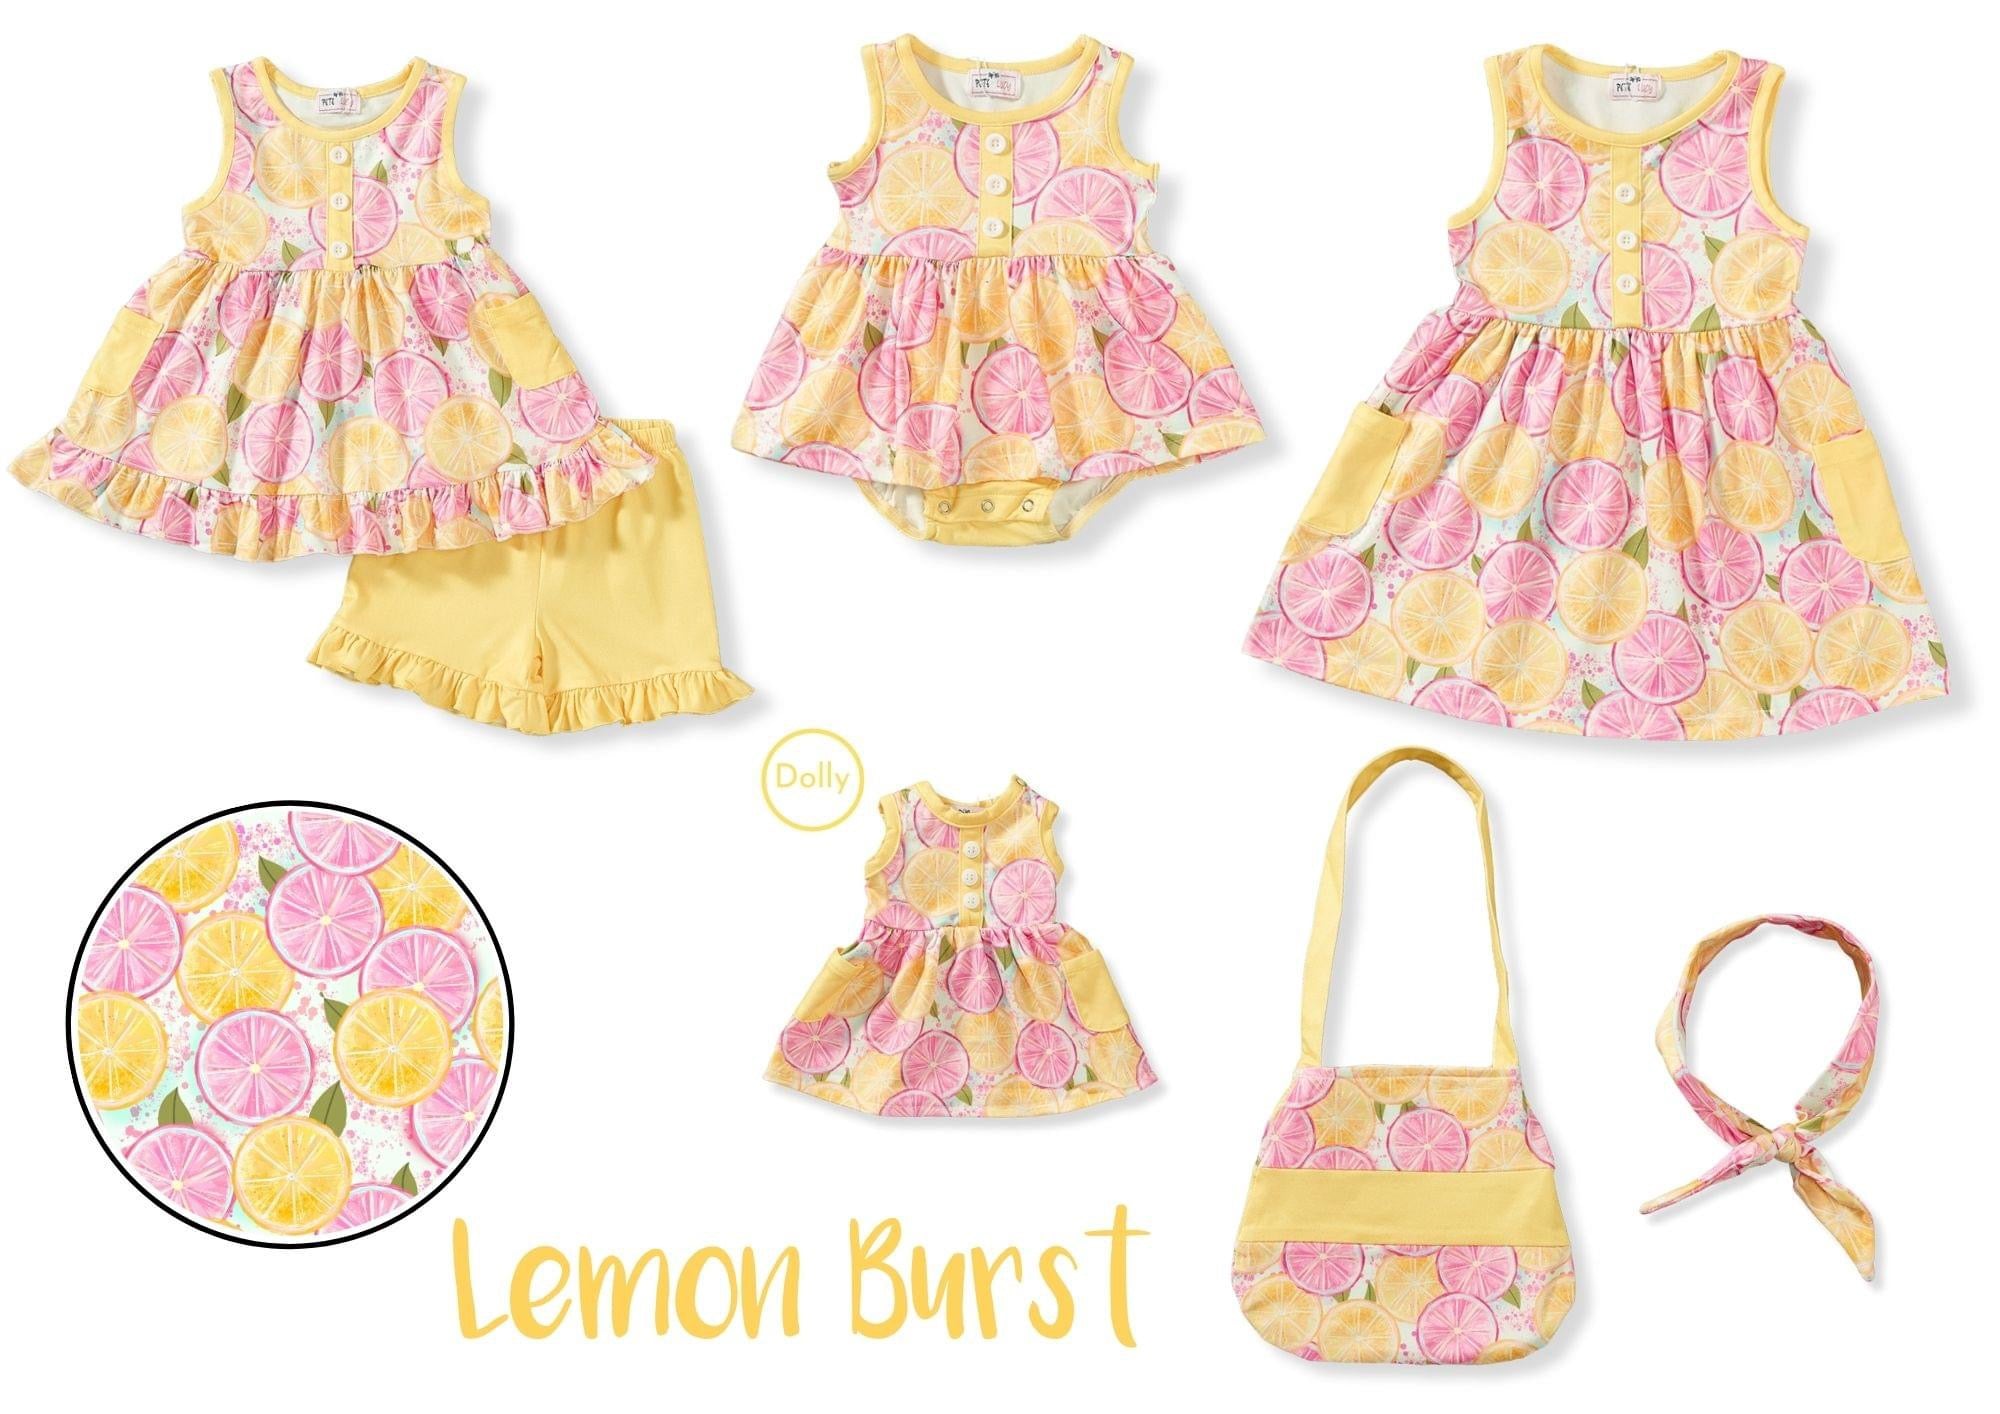 Lemon Burst Shorts Set by Pete and Lucy